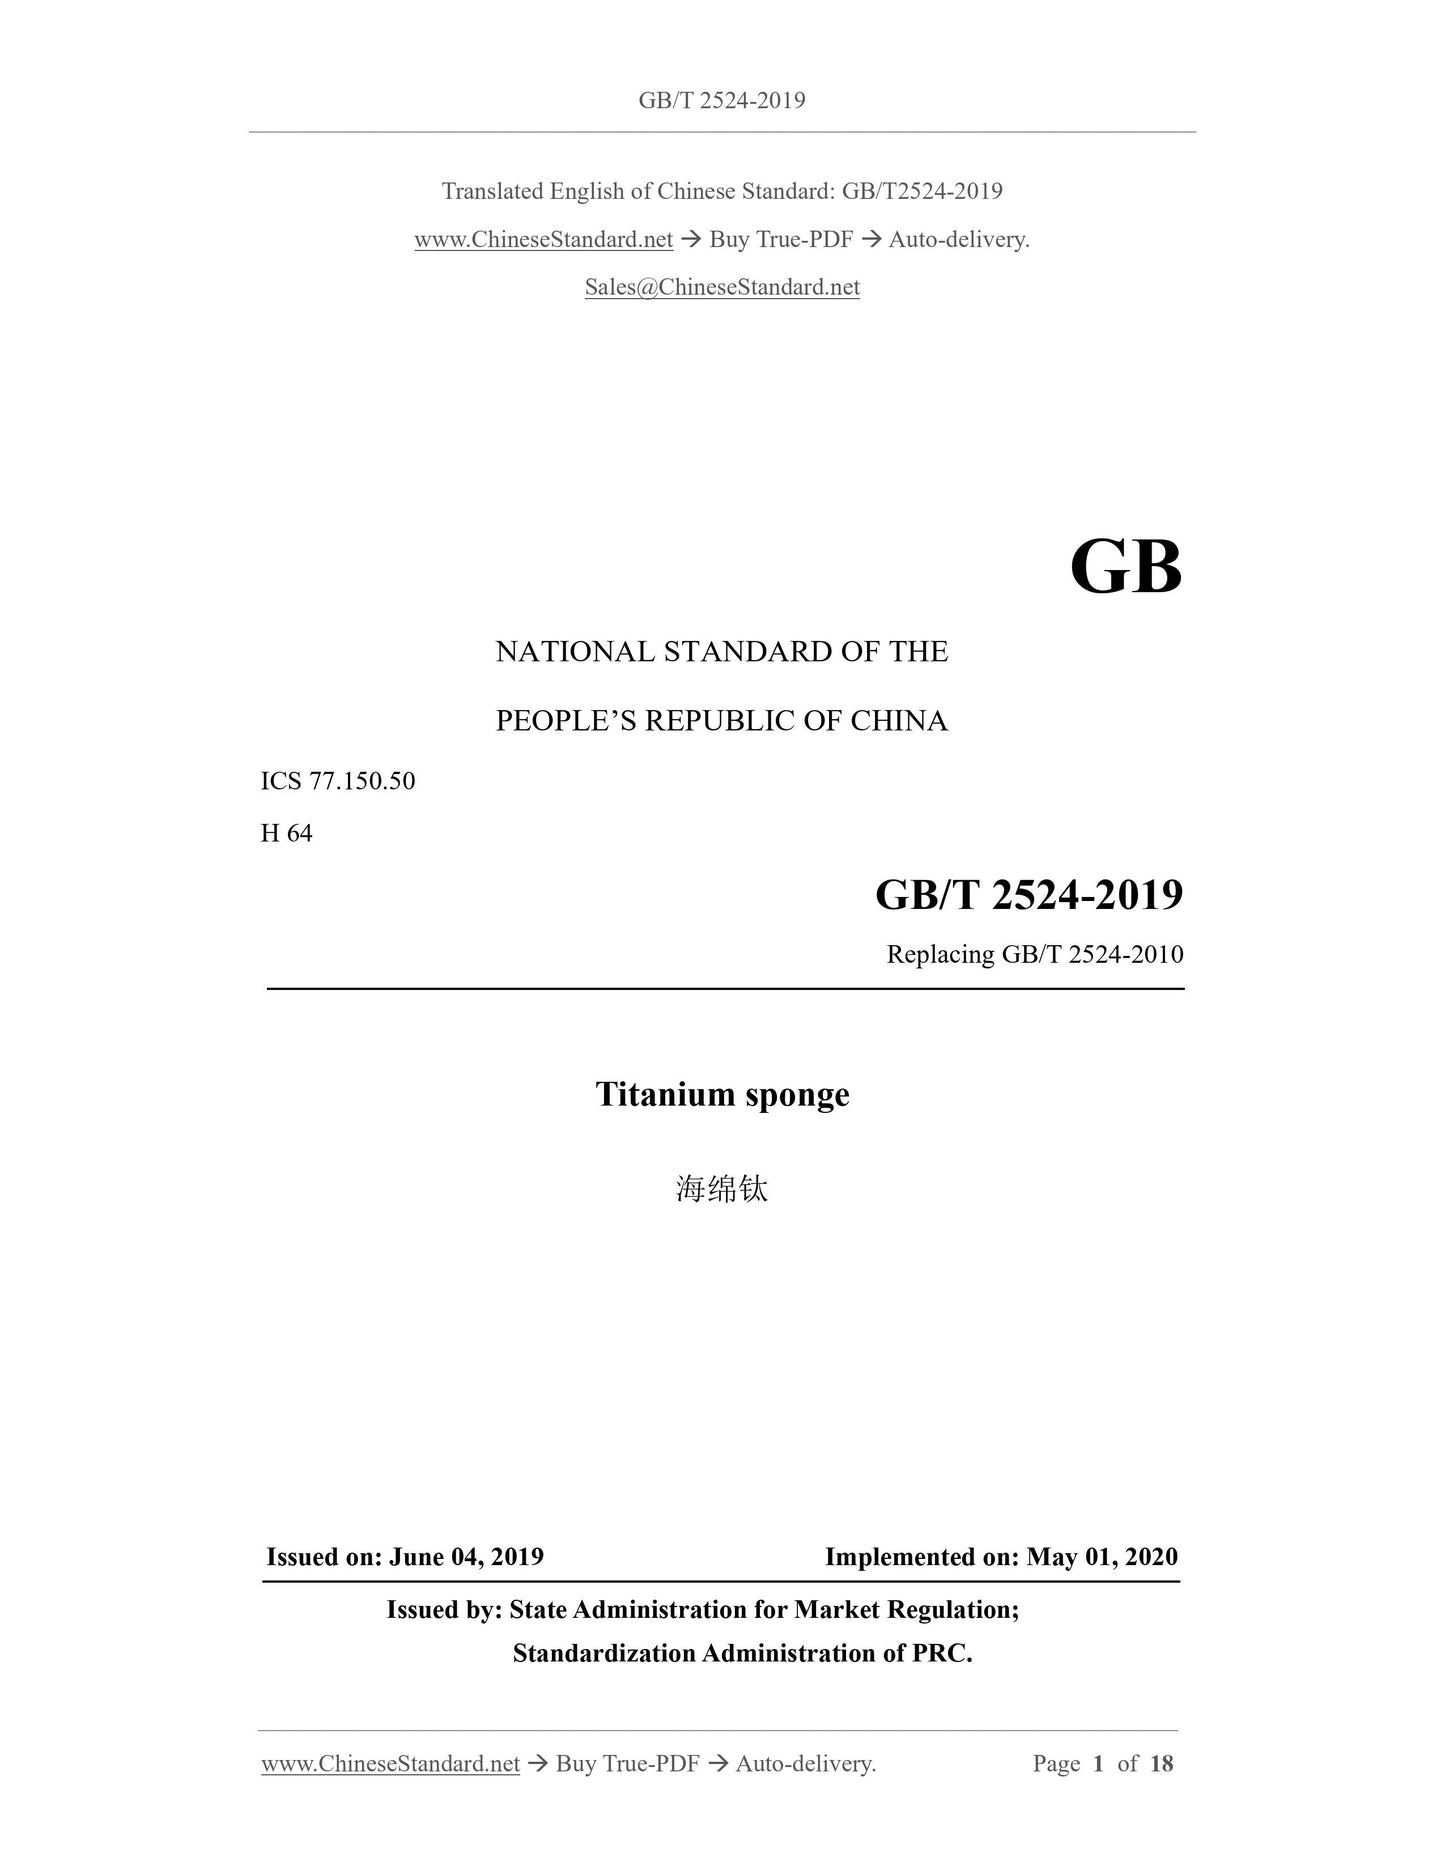 GB/T 2524-2019 Page 1